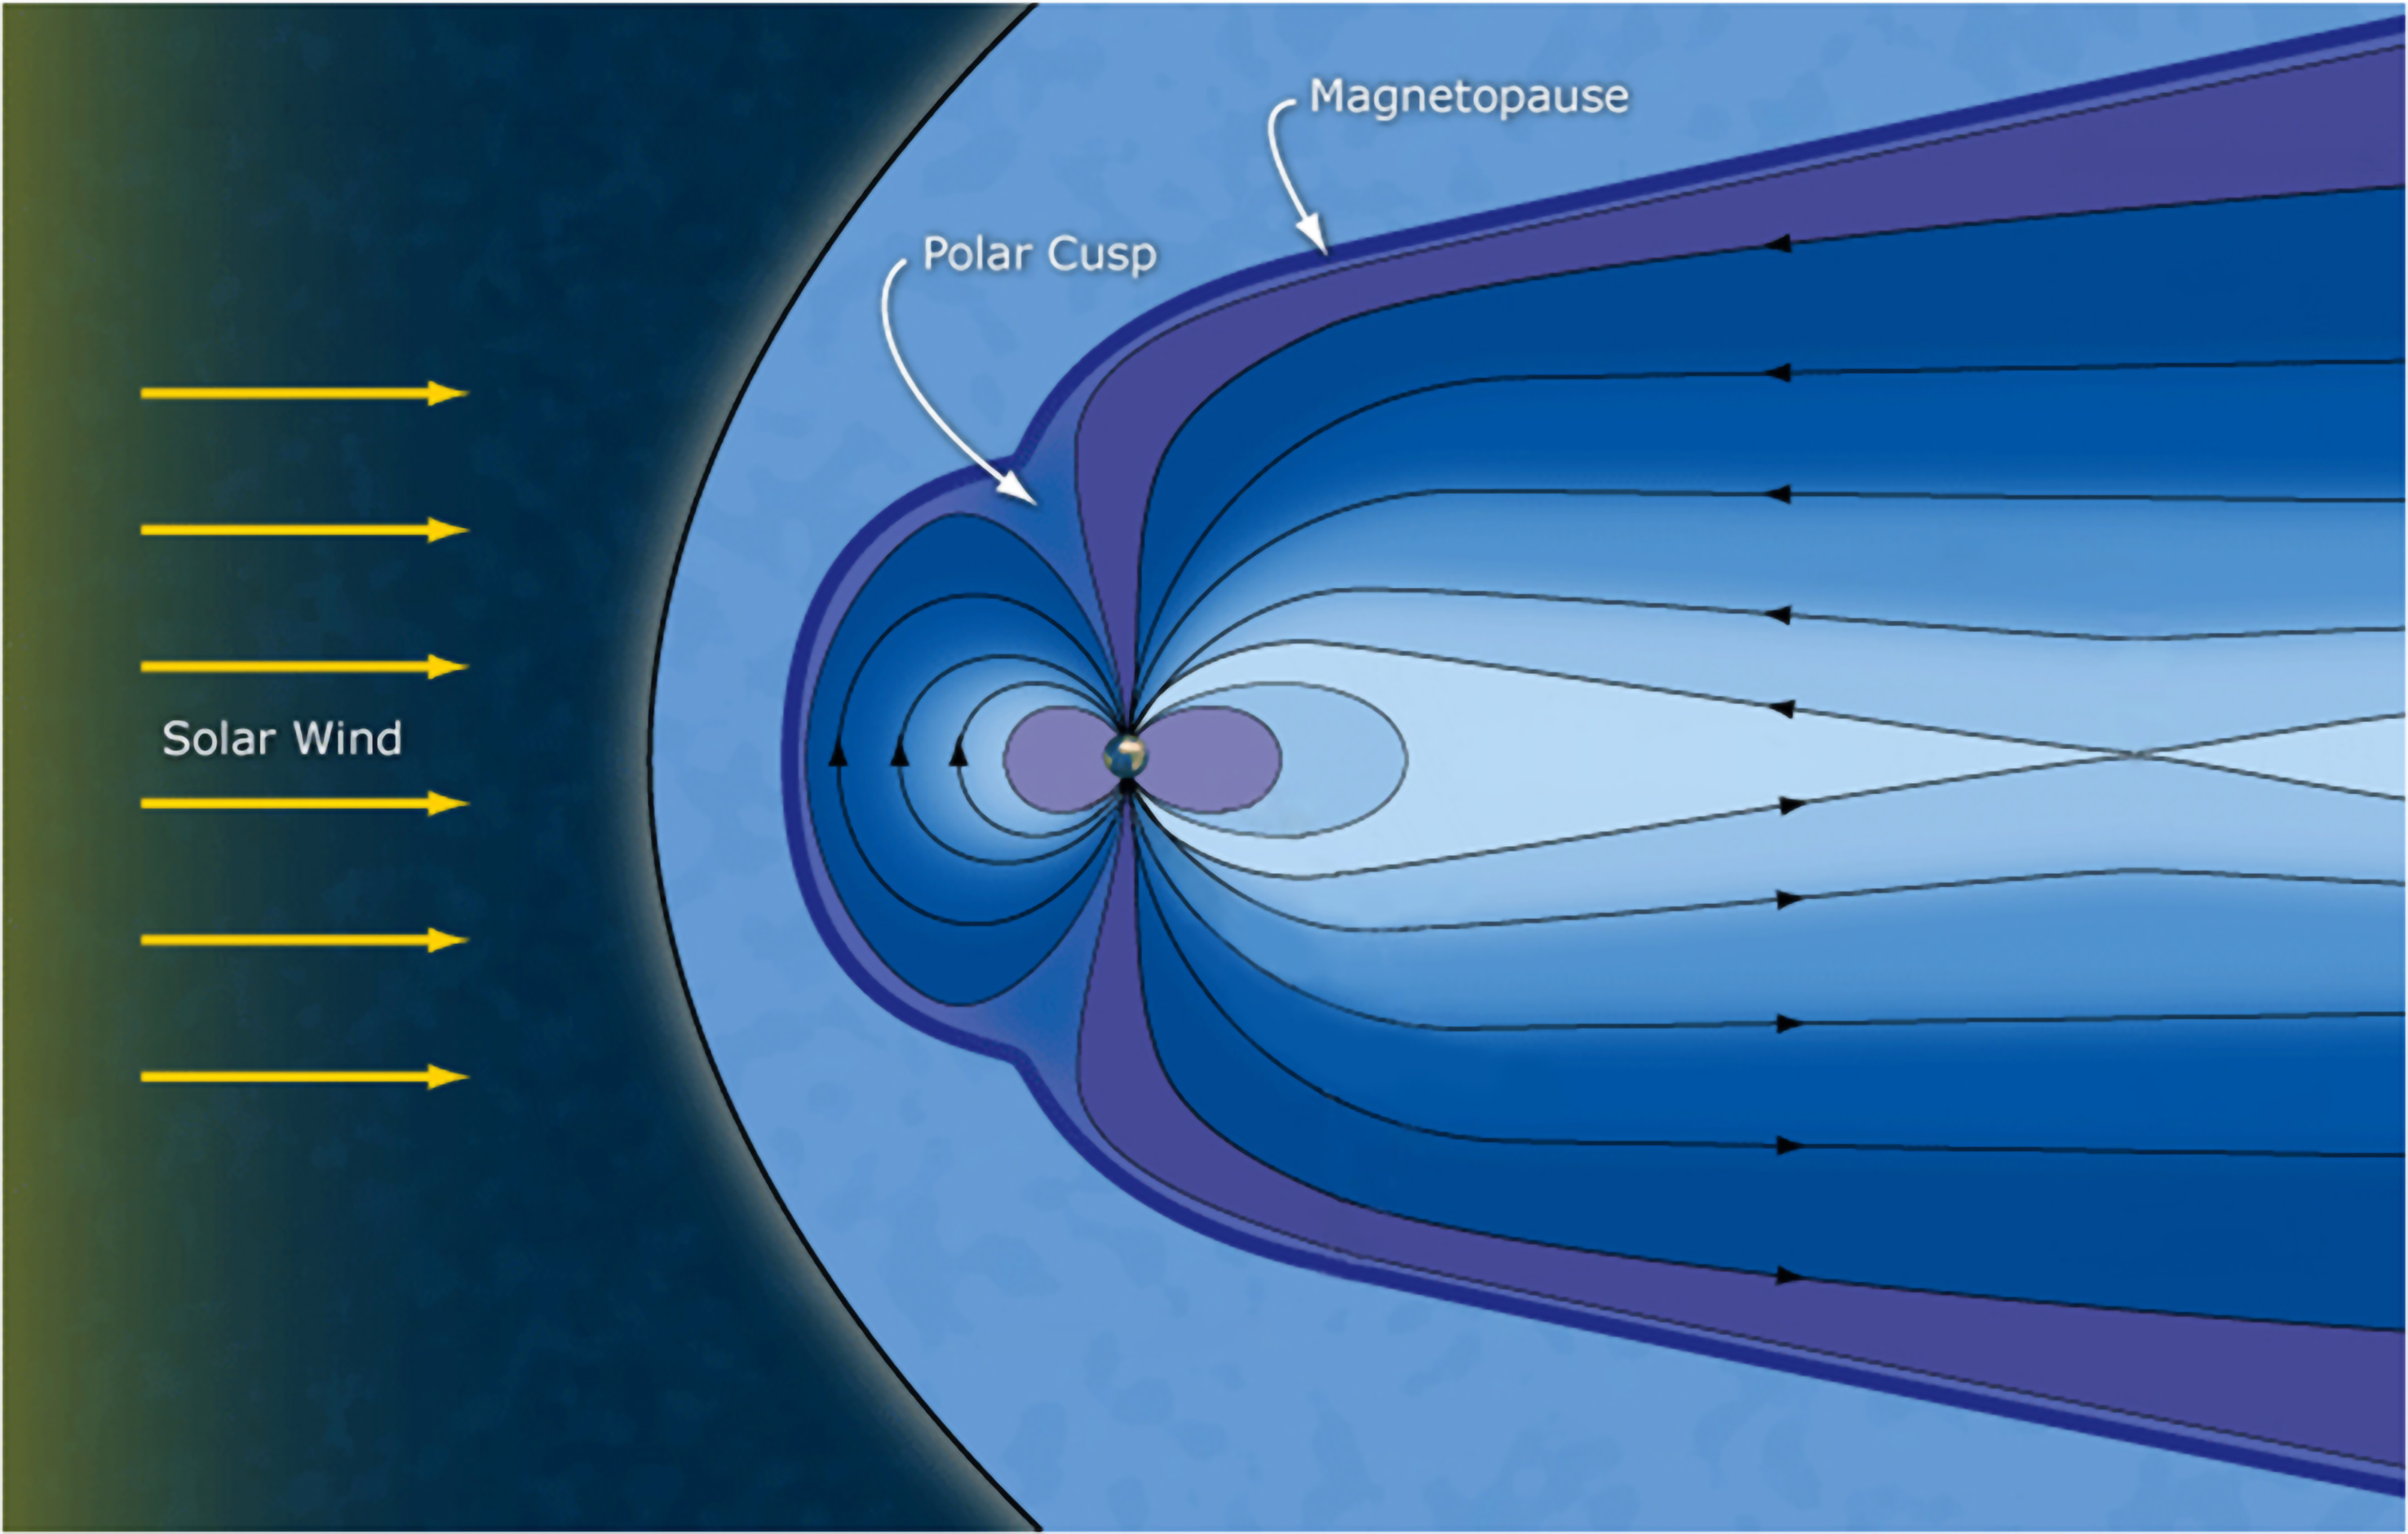 A simplified graphic of the Earth's magnetosphere and magnetic field lines, with labels indicating the solar wind, polar cusp, and magnetopause